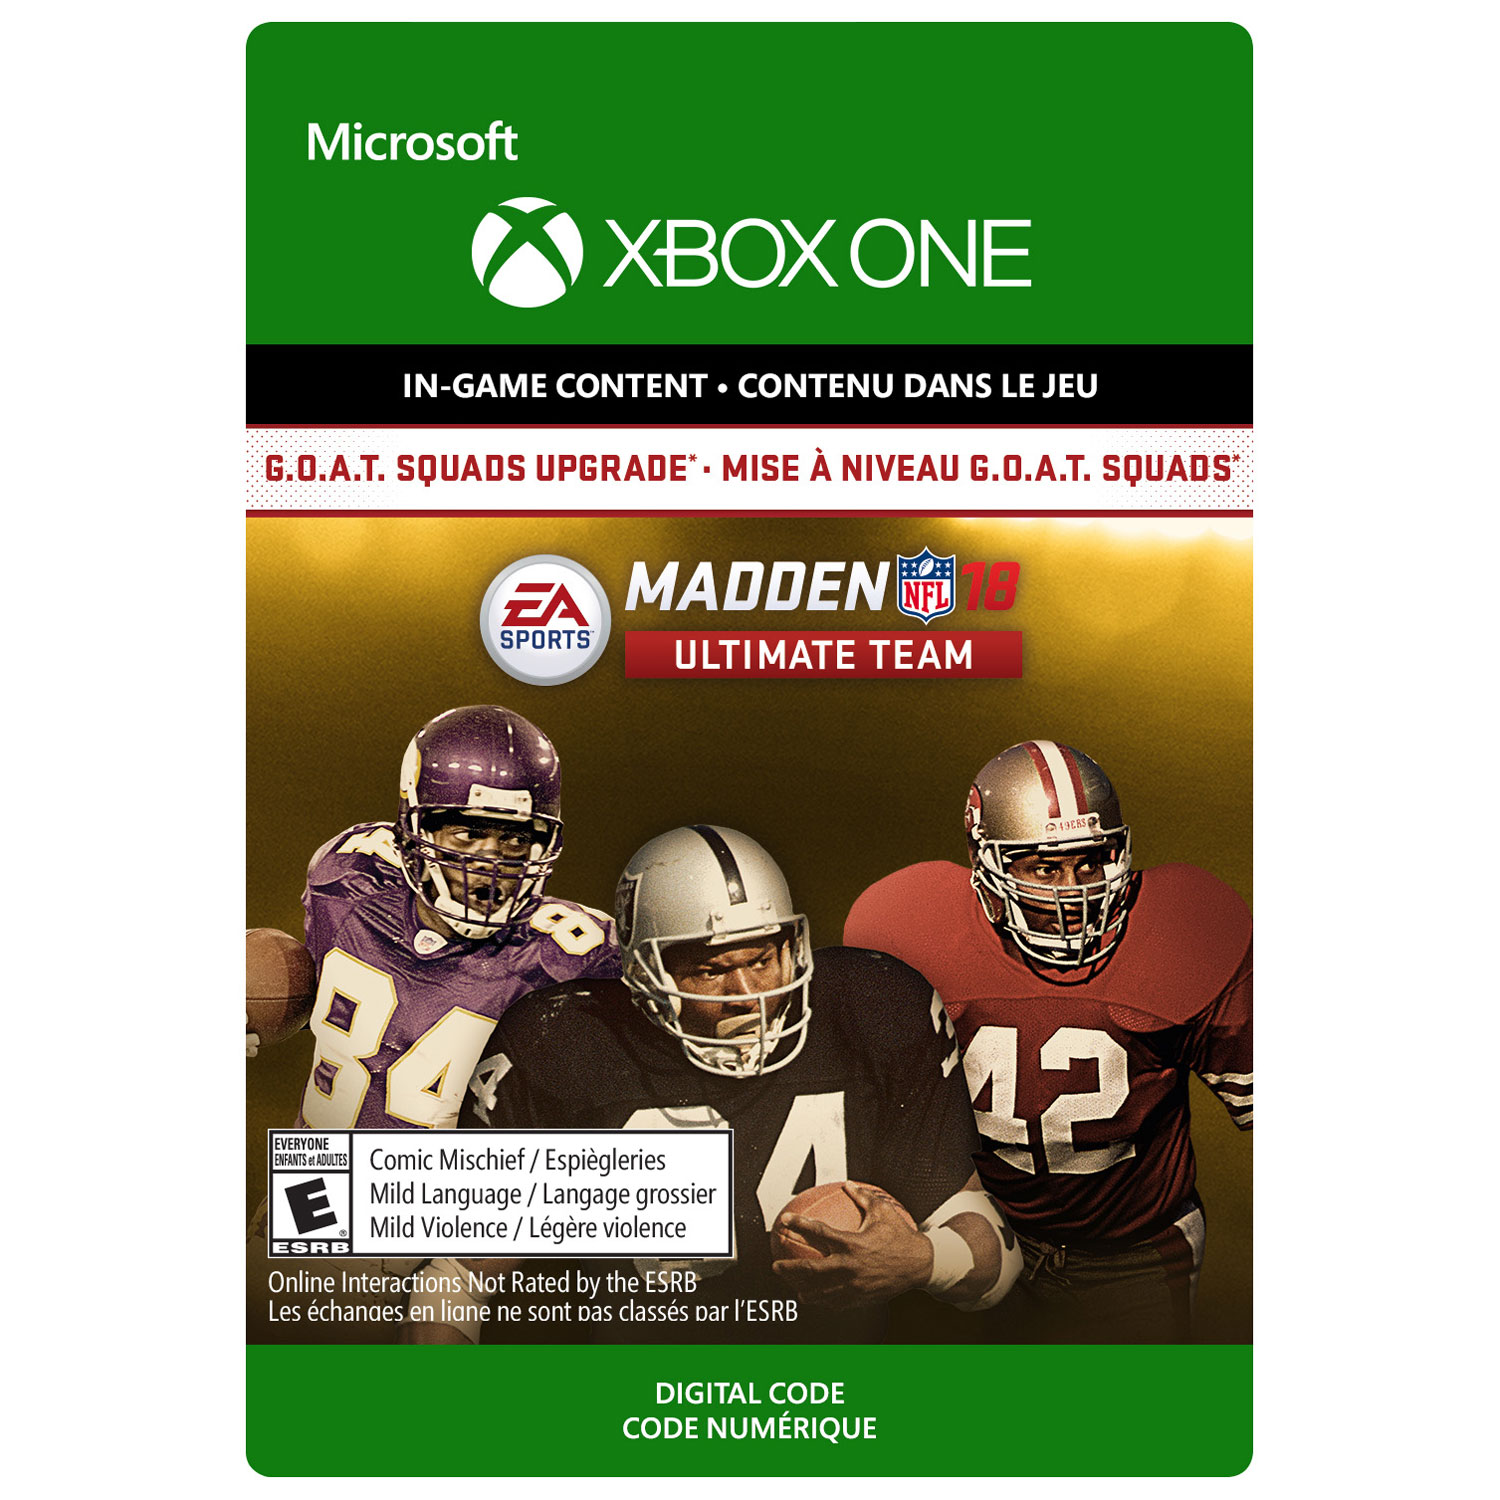 Madden NFL 18 G.O.A.T. Squads Upgrade (Xbox One) - Digital Download